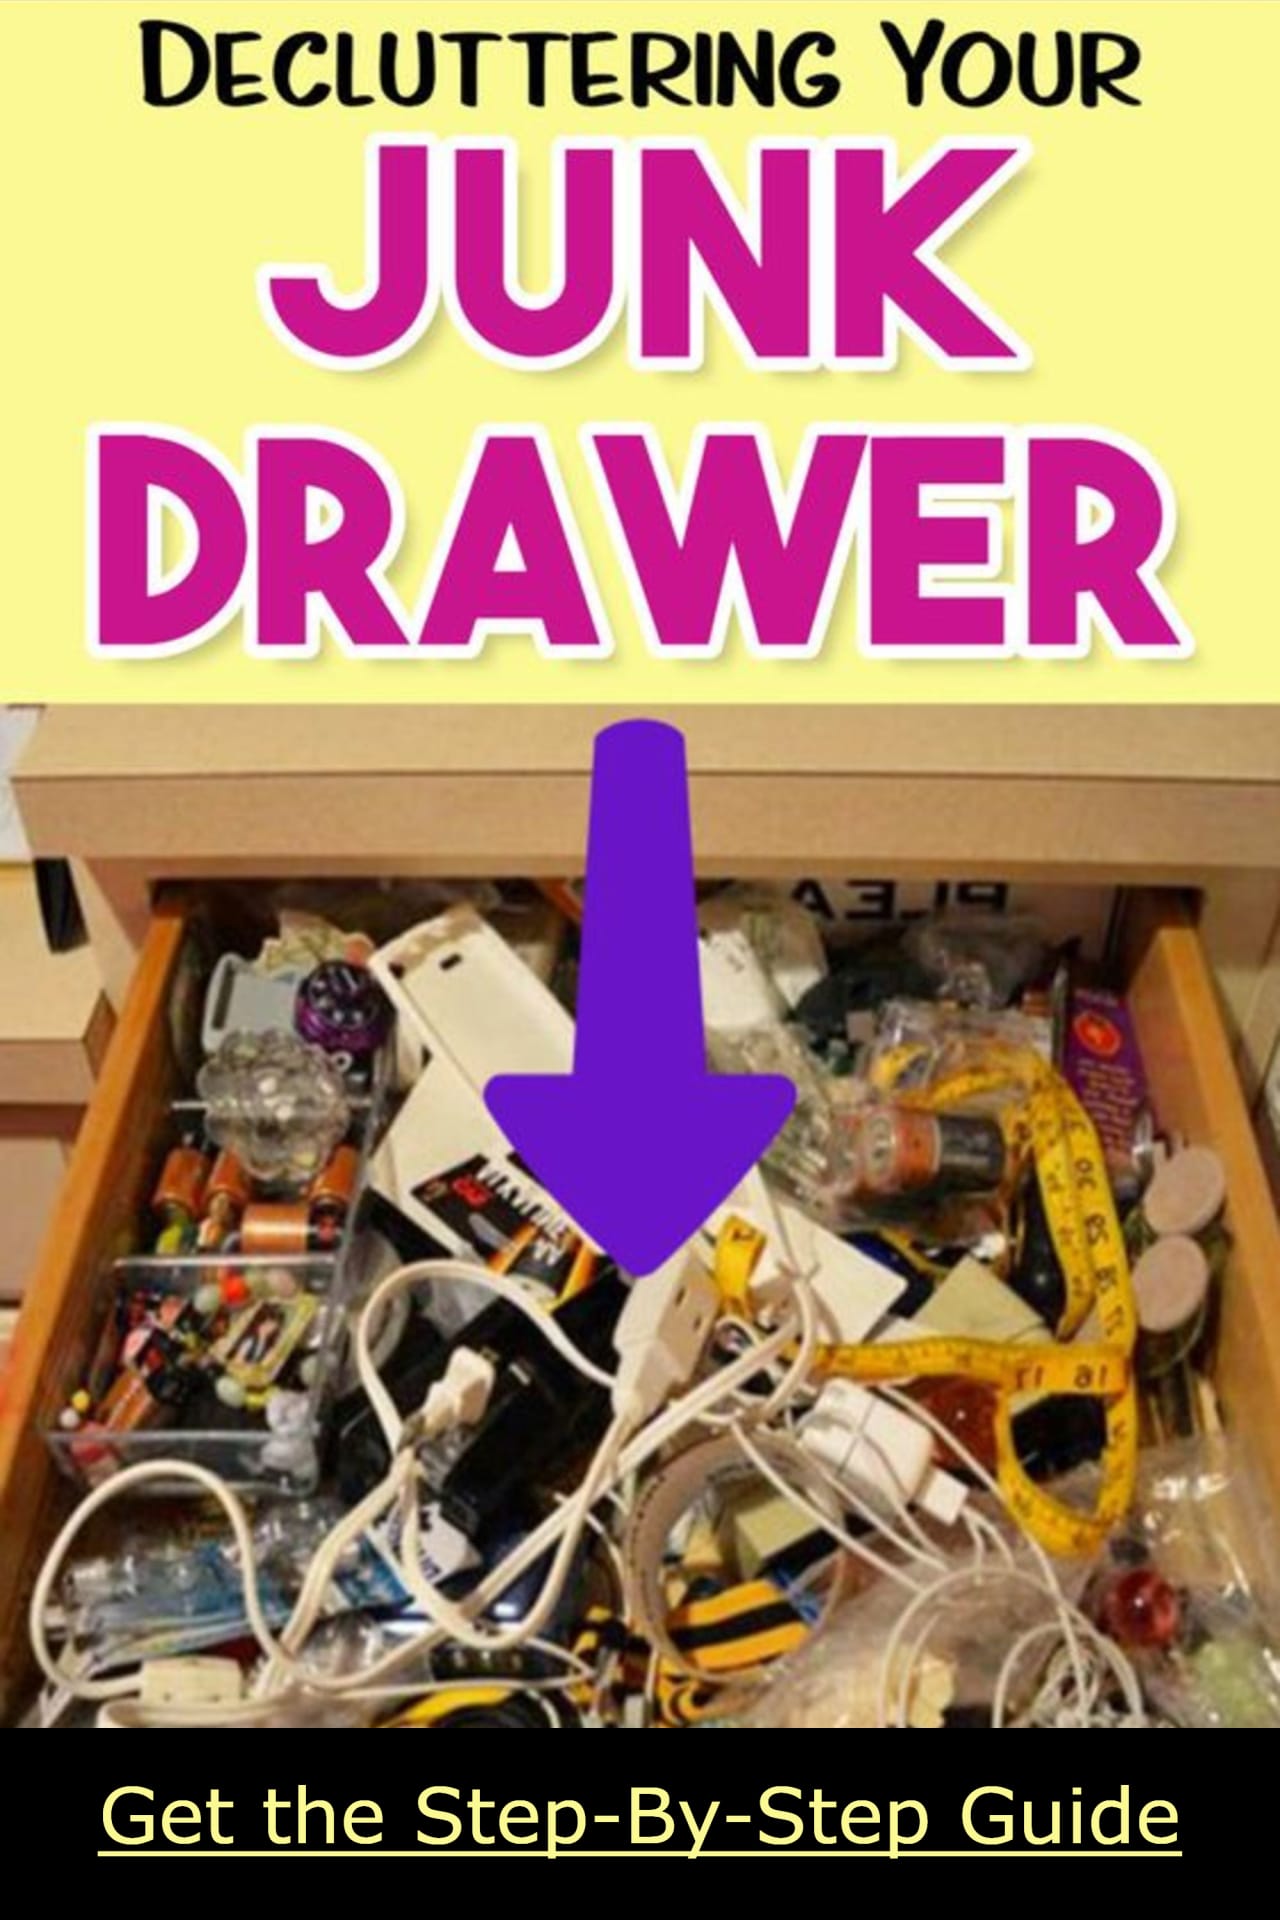 How to clean a cluttered house FAST... step by step, room by room, drawer by drawer.  Declutter and organizing your kitchen junk drawers the easy way